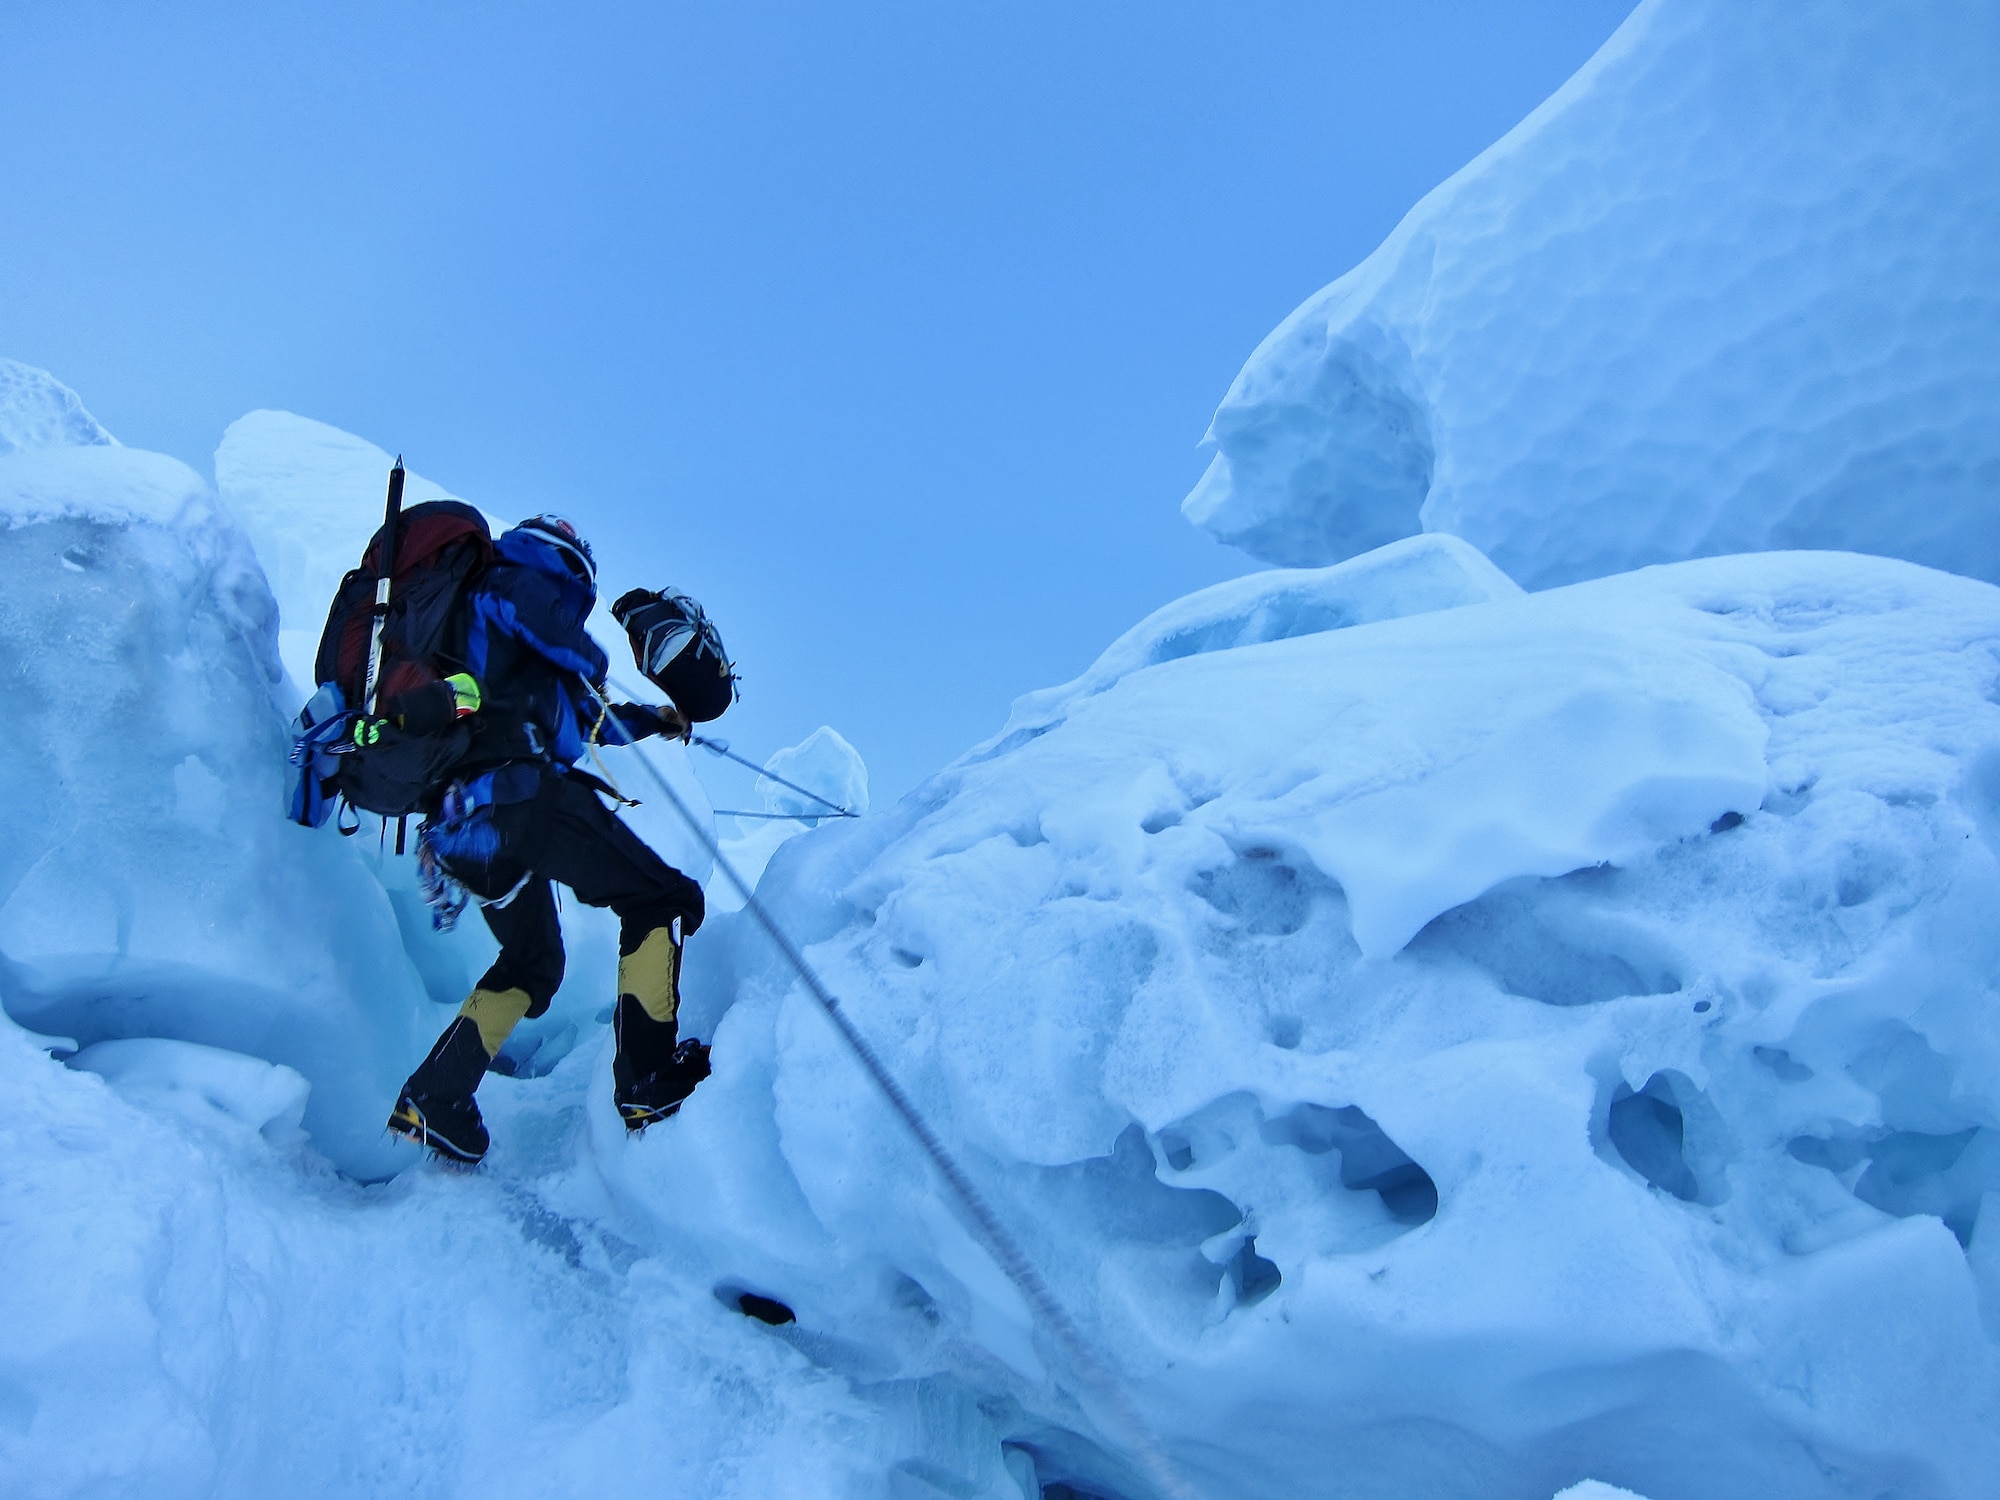 Mountaineer Capt. Marshall Klitzke mitigates the risks as he climbs Khumbu Ice Fall during the acclimatization for the Mount Everest Challenge, May 2013.